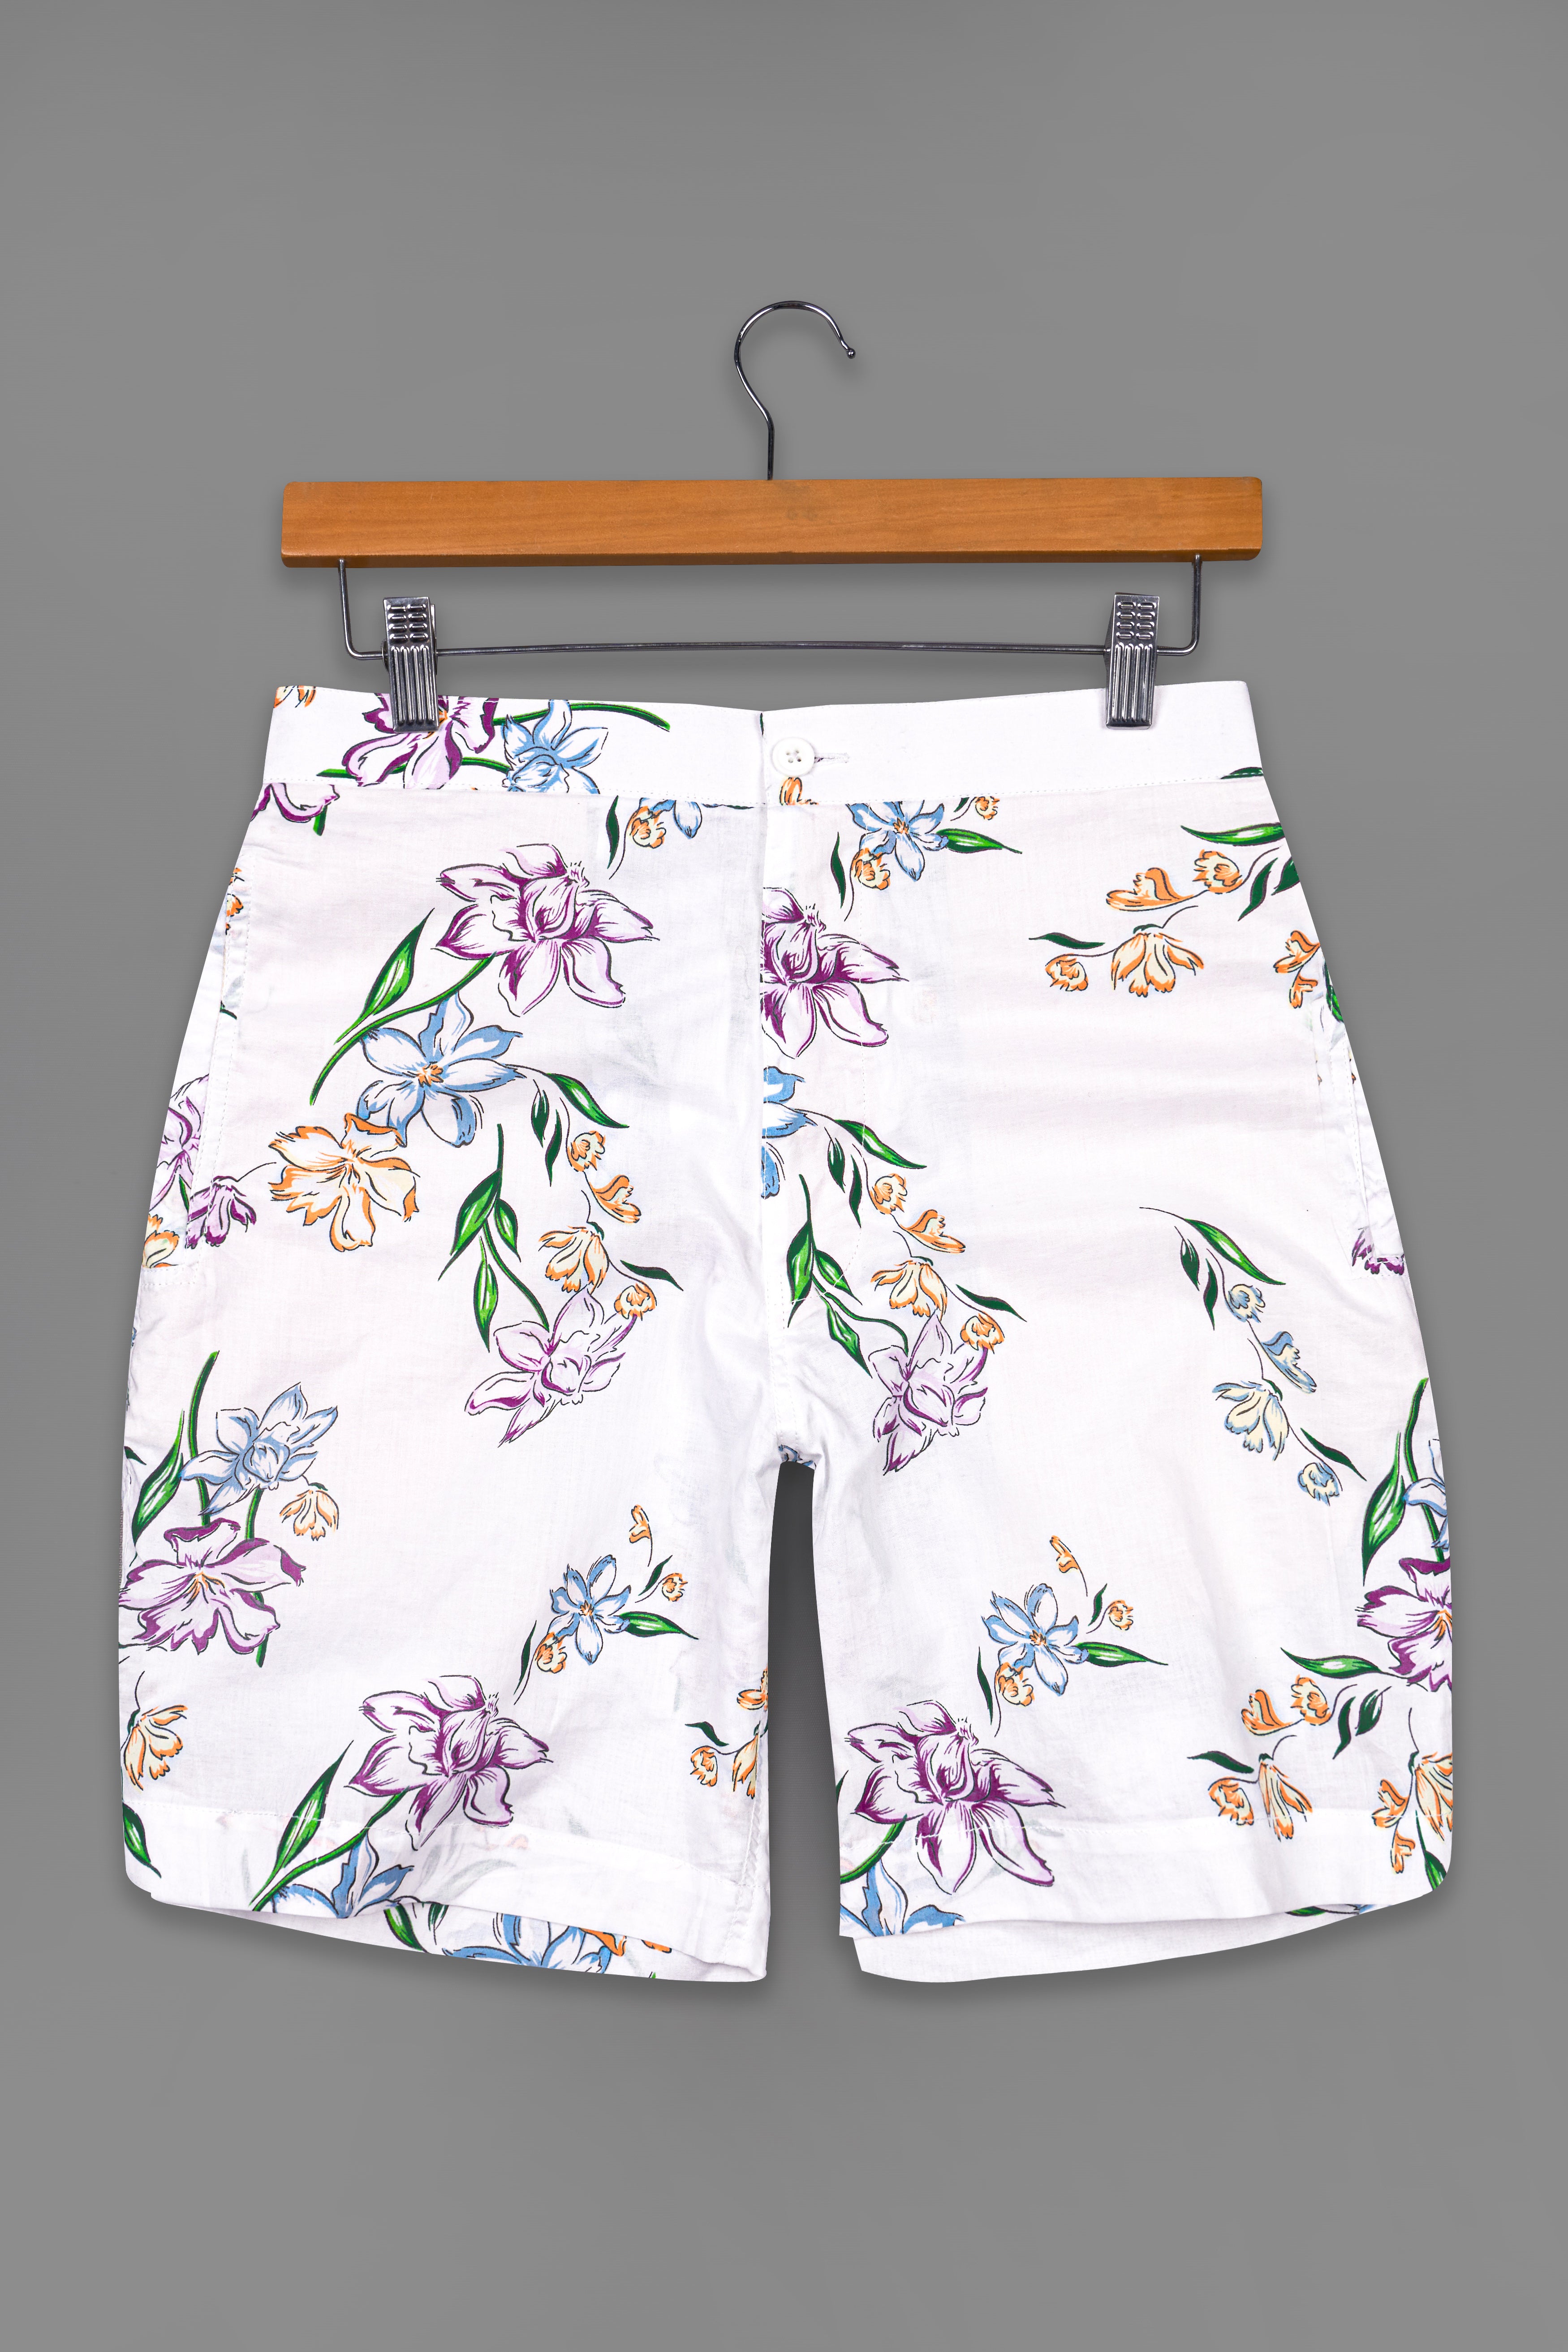 Bright White Floral Printed Light Weight Premium Cotton Shorts SR268-28, SR268-30, SR268-32, SR268-34, SR268-36, SR268-38, SR268-40, SR268-42, SR268-44